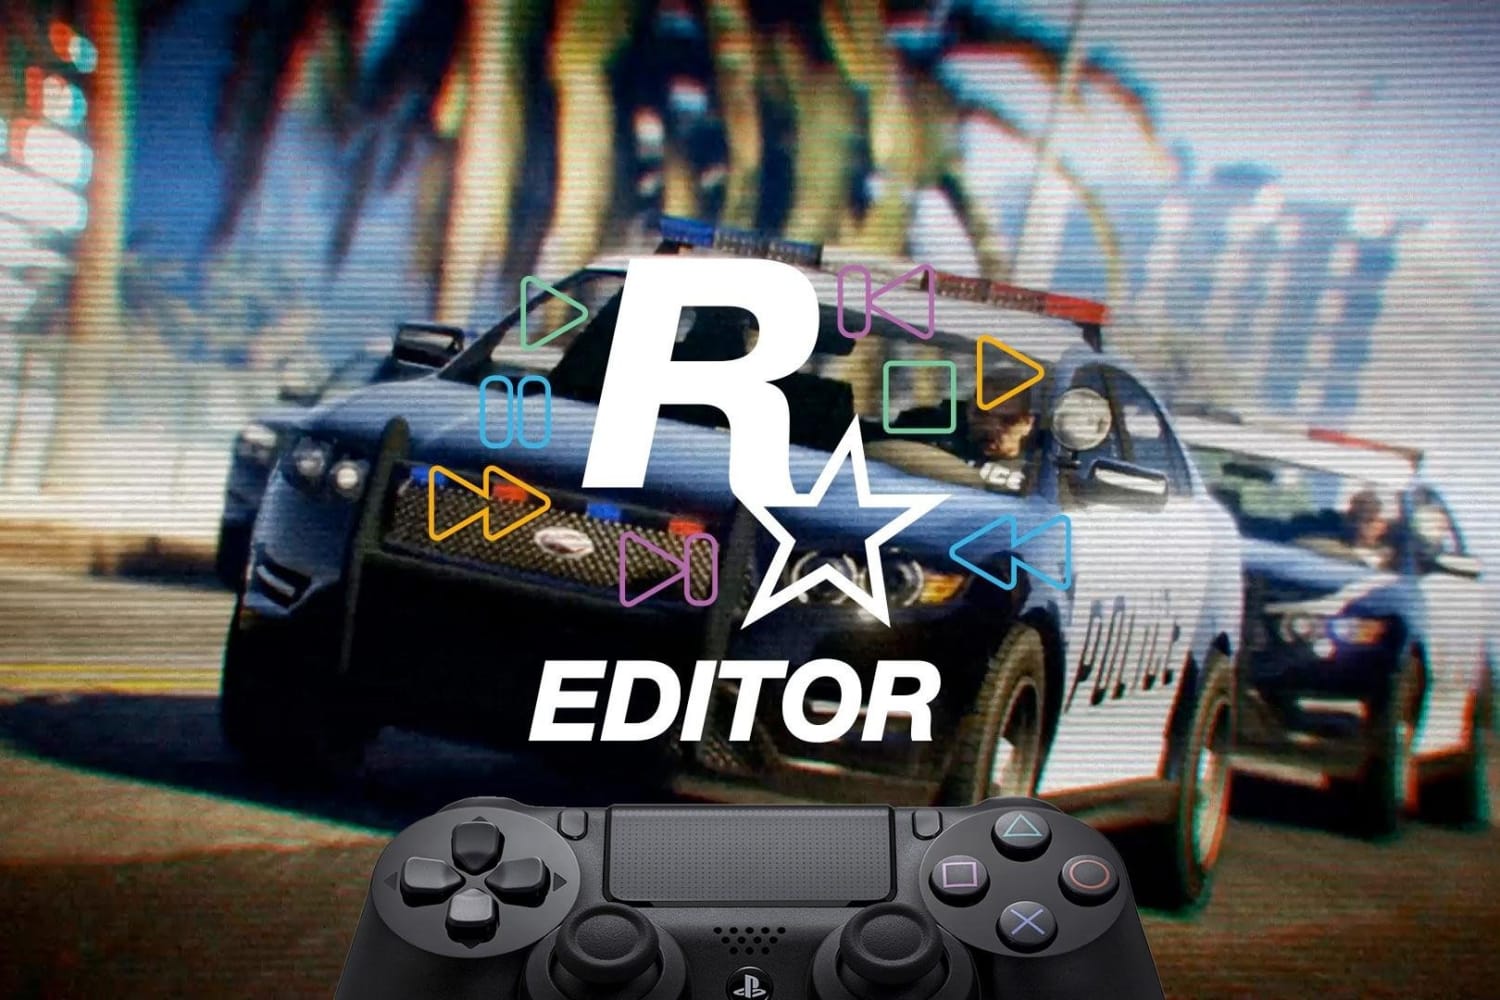 Rockstar Editor On Console How To Make Gta Movies